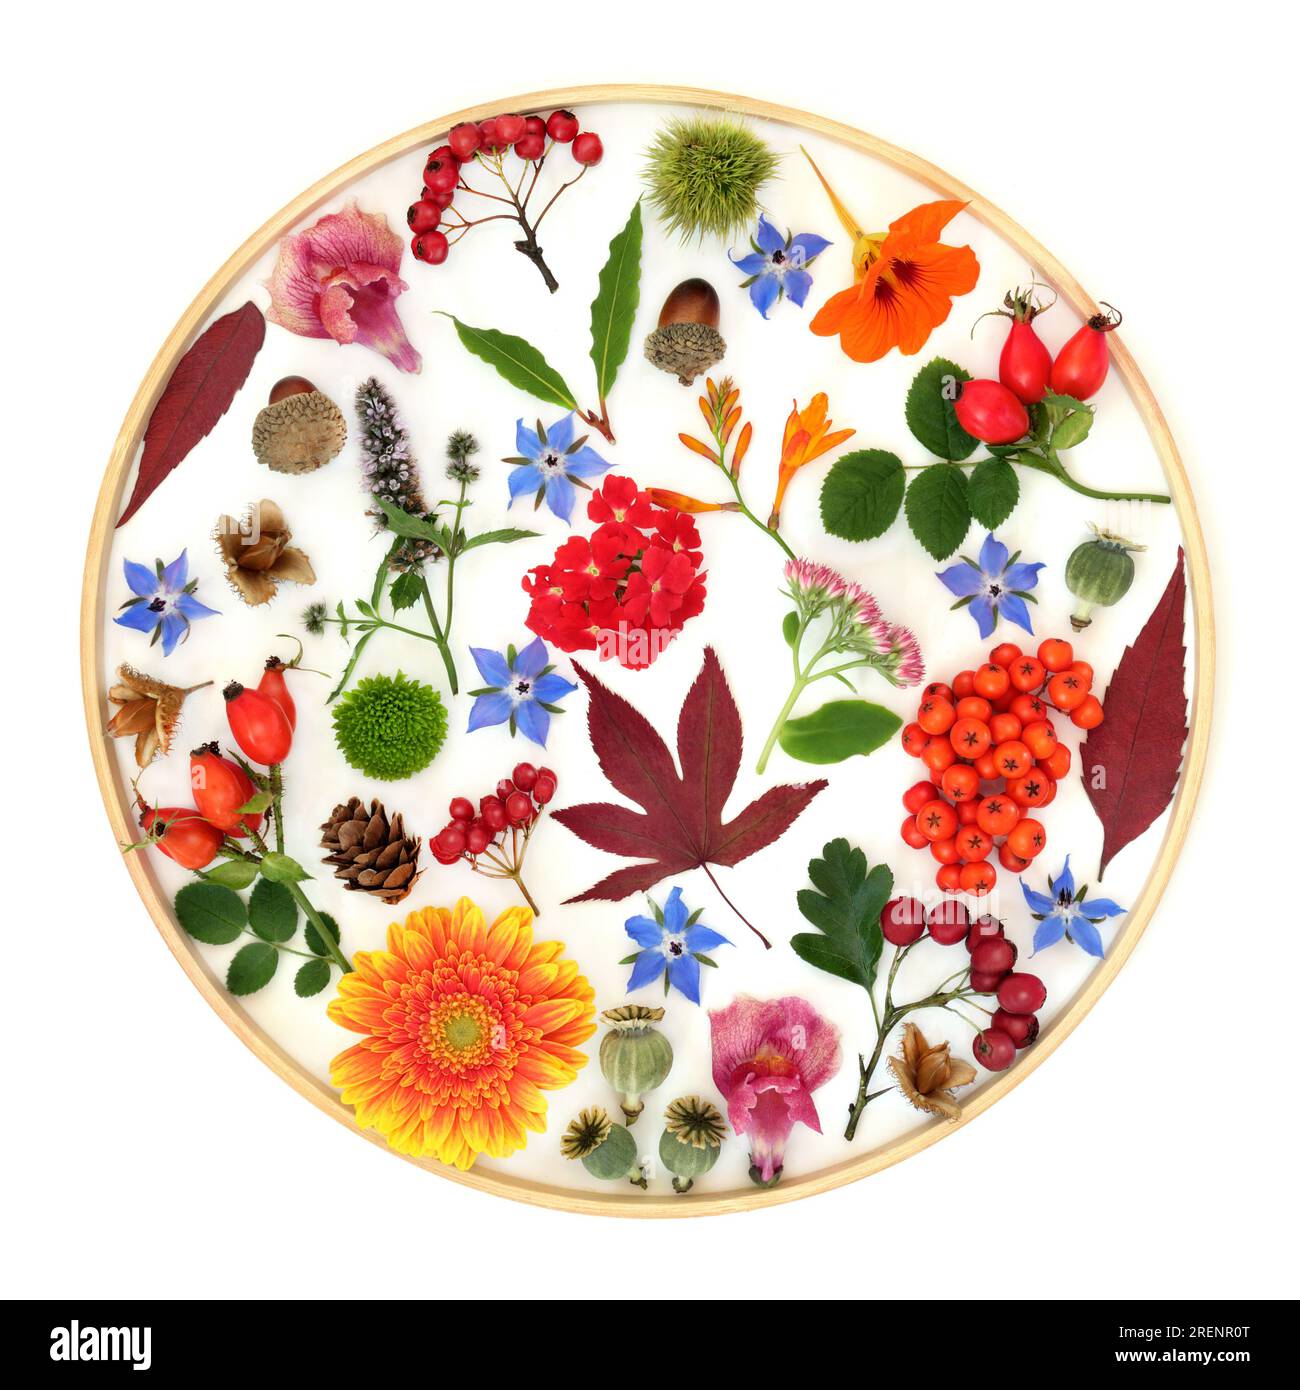 Autumn Thanksgiving Fall leaves flowers, nuts, berry fruit design on white background in wooden circular frame. Abstract flora and fauna design. Stock Photo